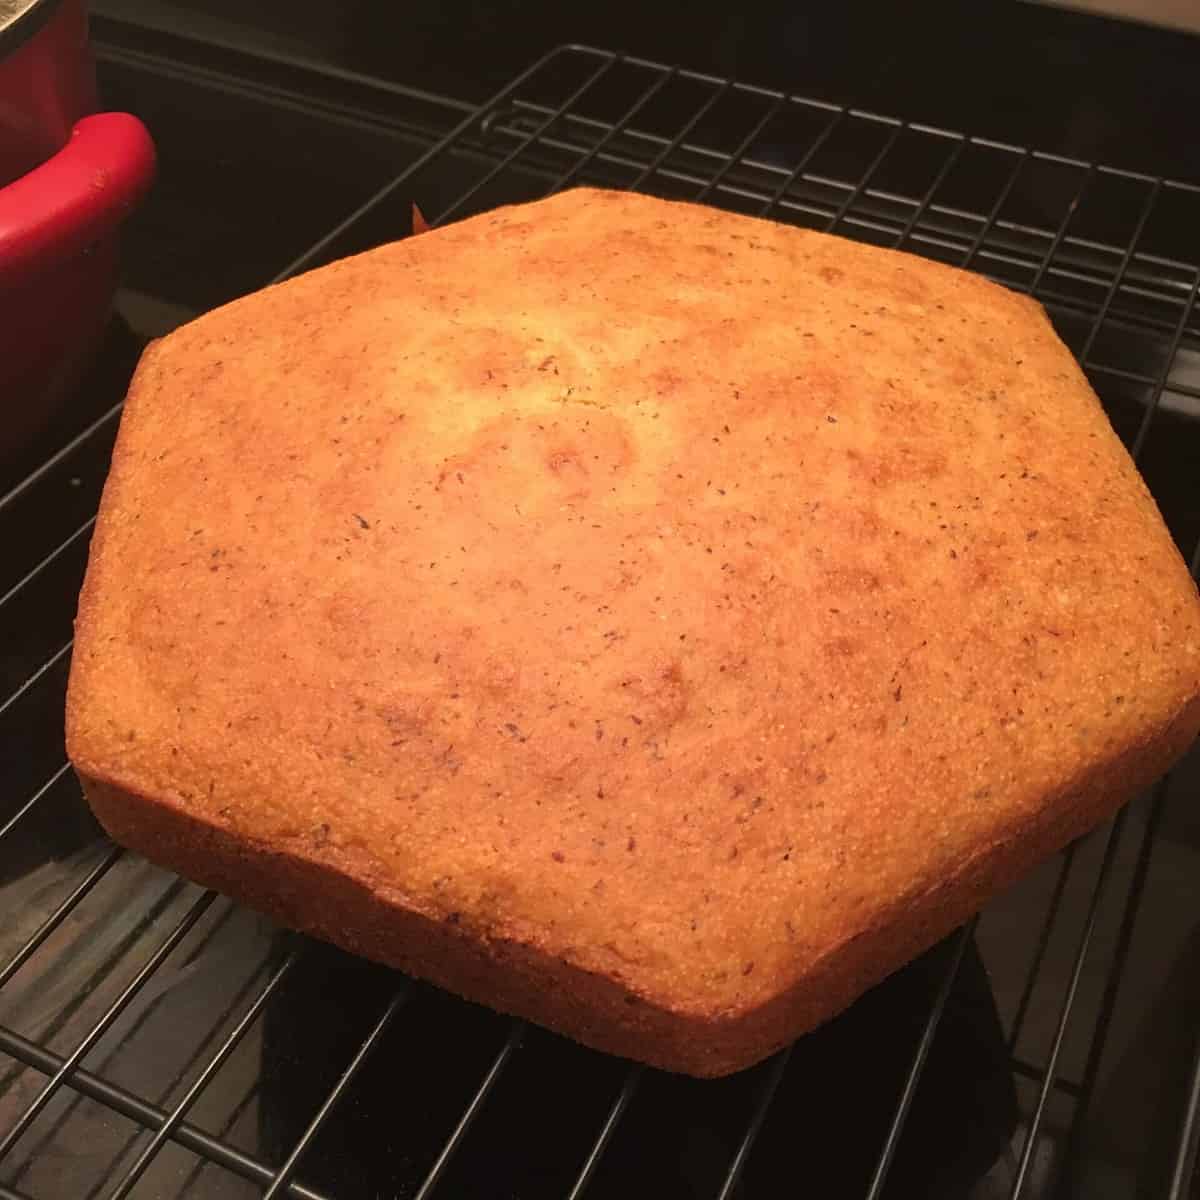  This cornbread will be the star of your next barbecue or family dinner.